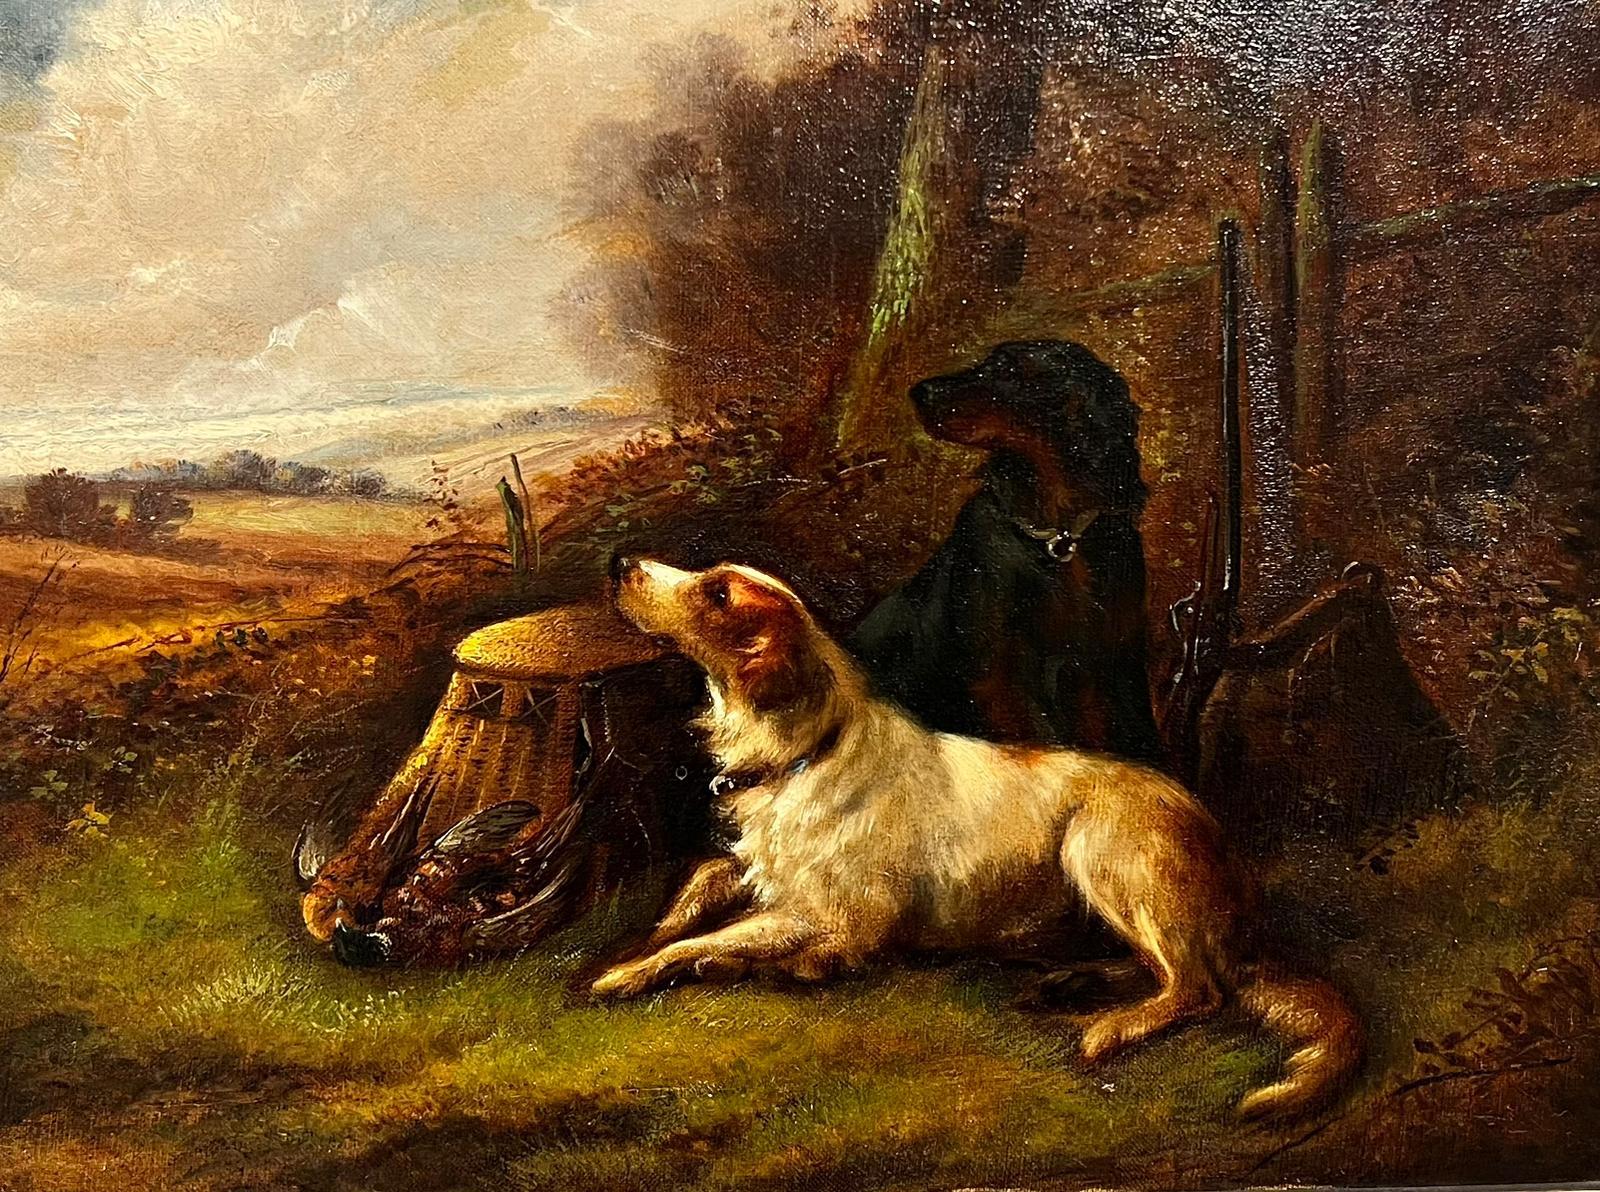 Robert Cleminson Landscape Painting - Antique British Sporting Art Oil Painting Hunting Dogs Waiting for their Master